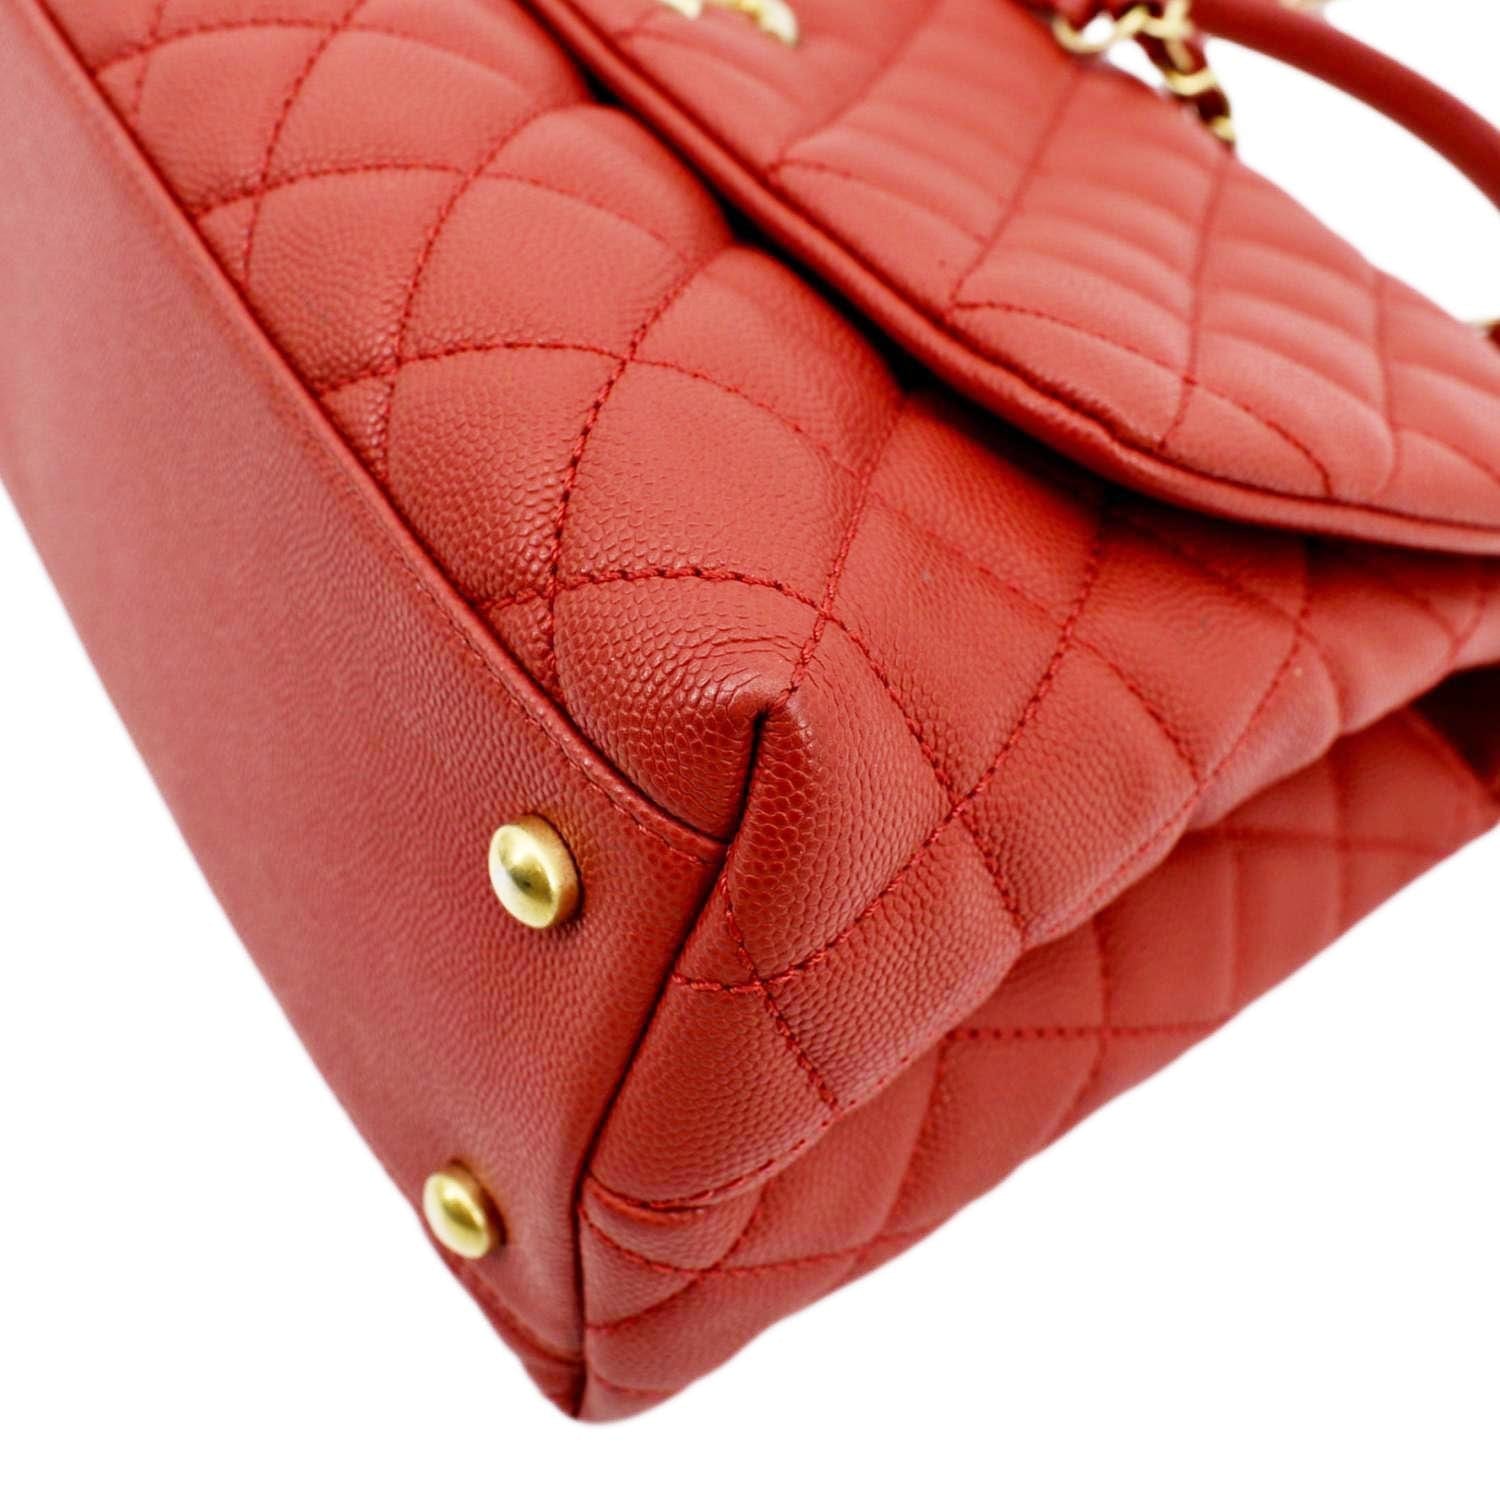 Coco handle Chanel bag in red 2019